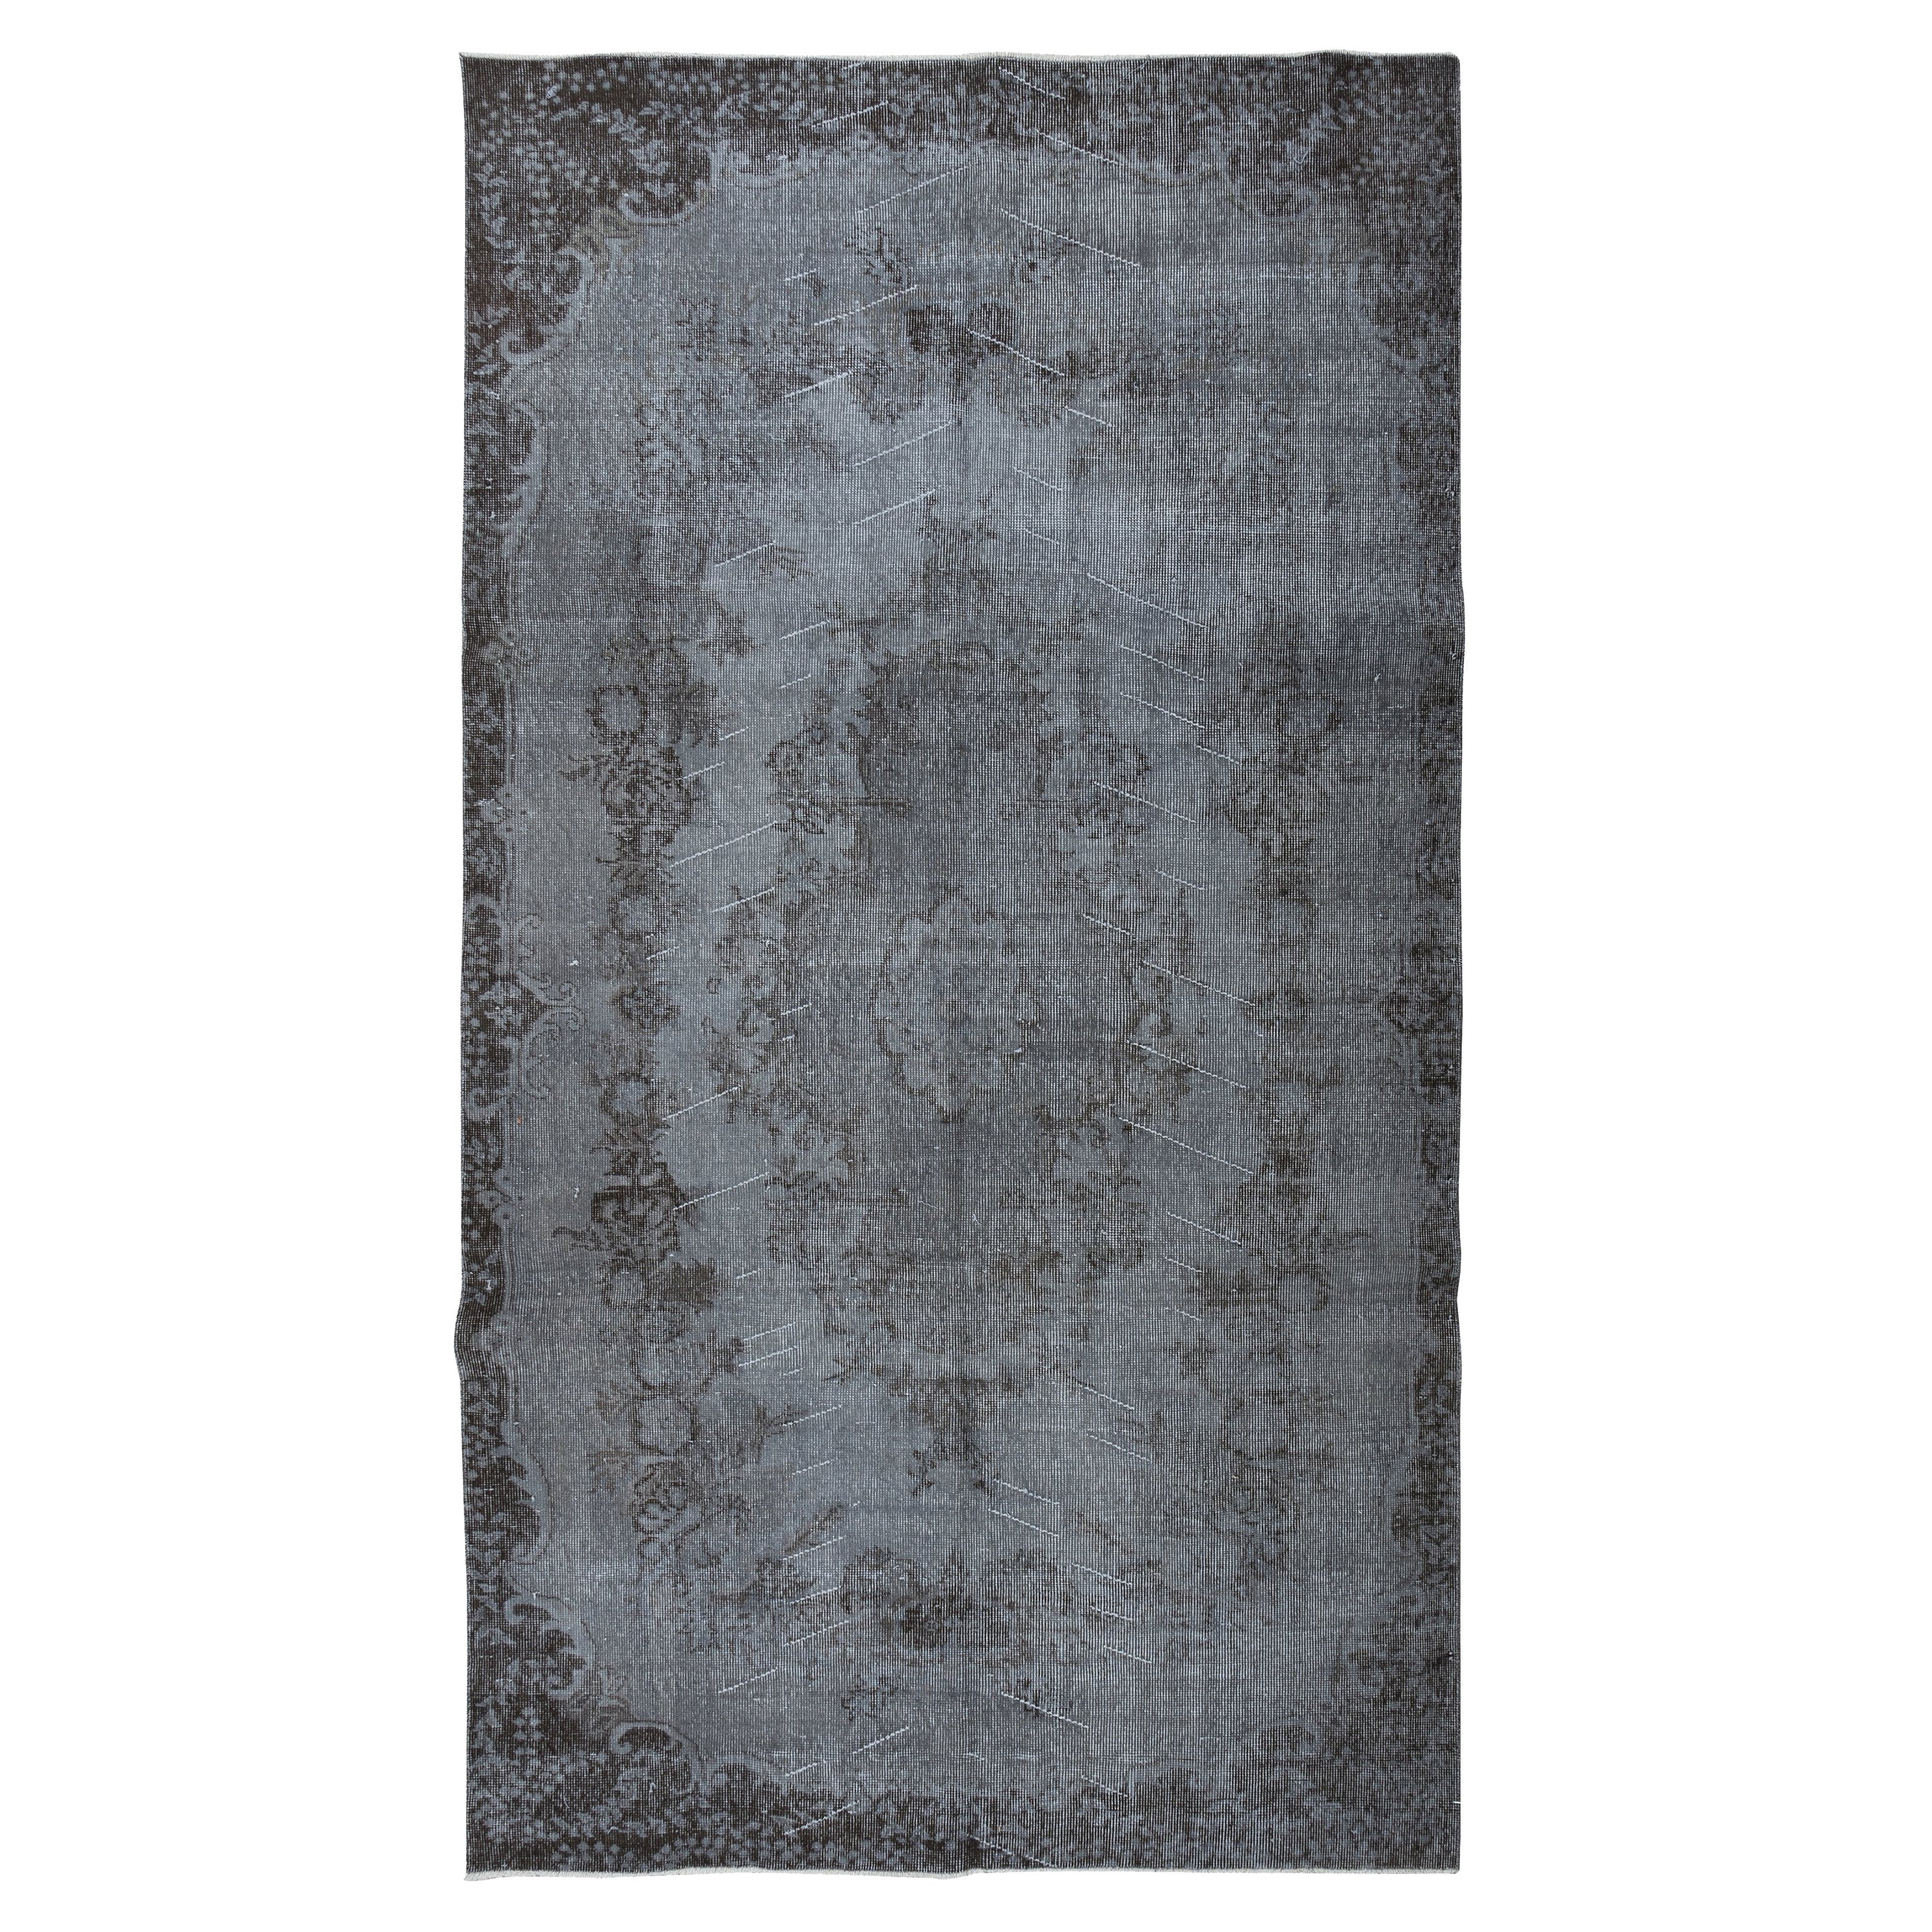 5.5x9.8 Ft Contemporary Overdyed Hand Knotted Wool Grey Area Rug from Turkey For Sale